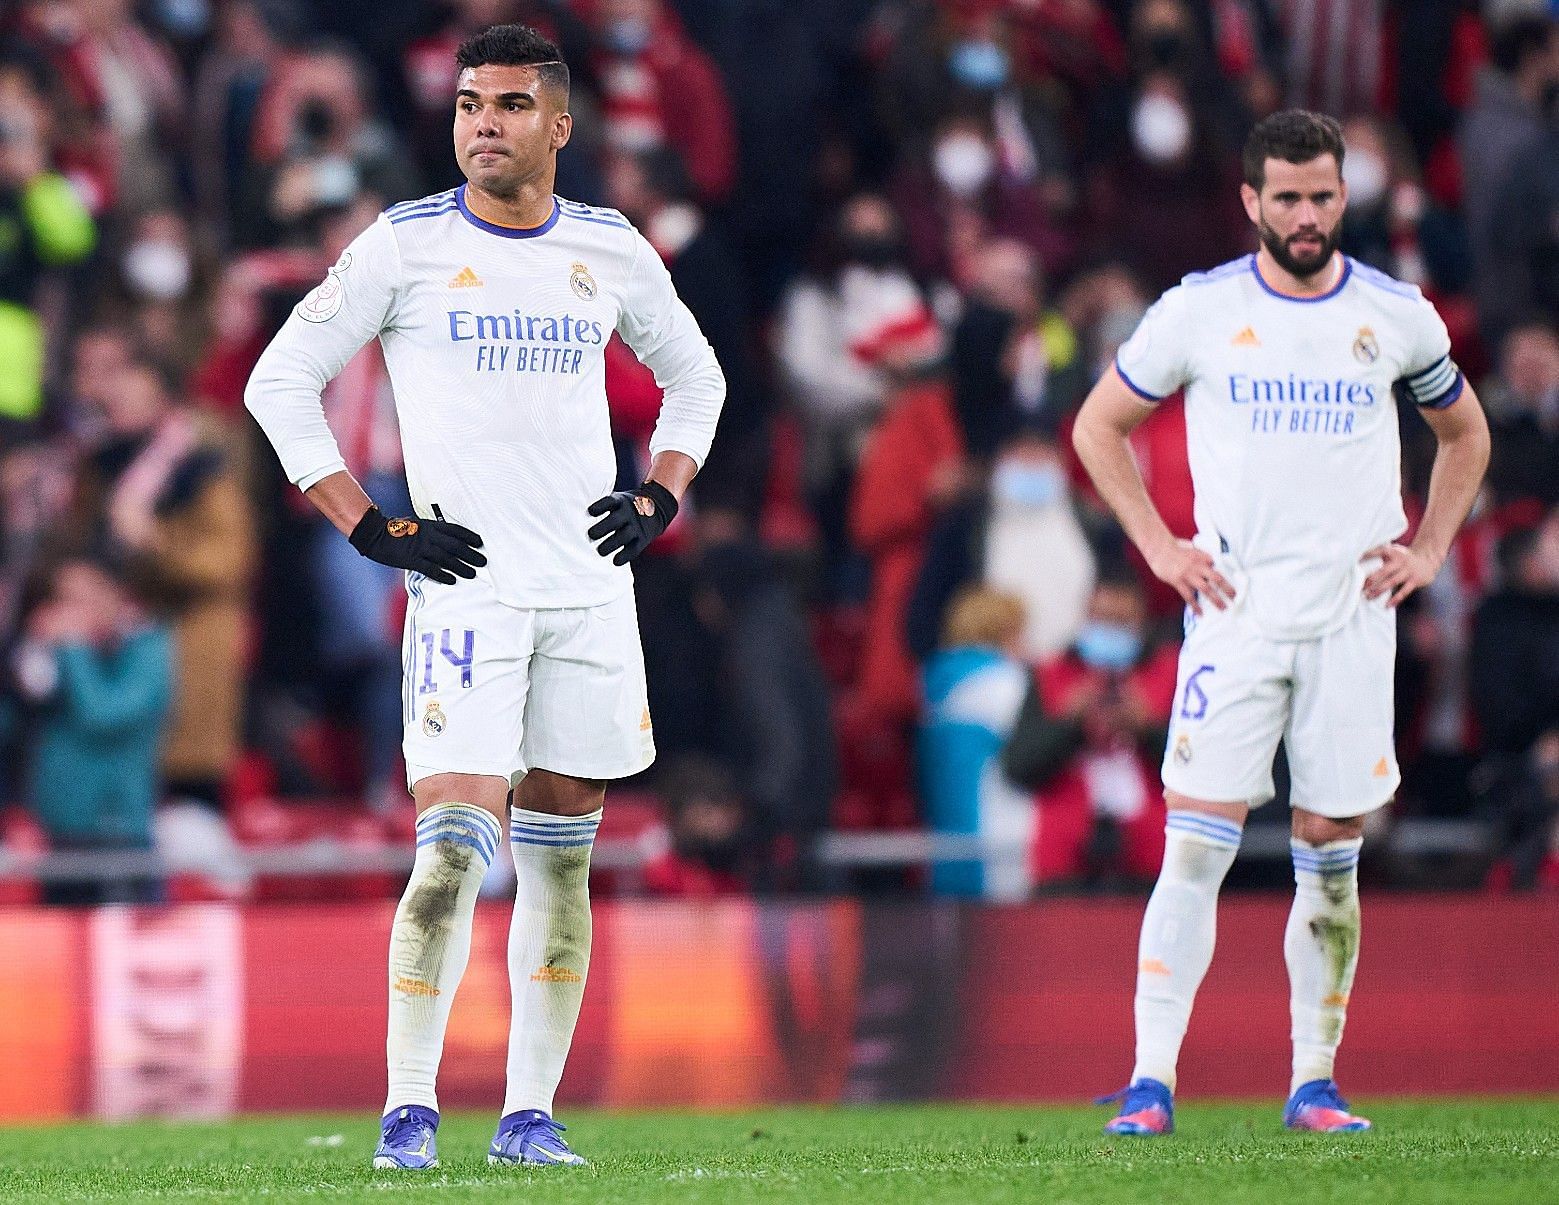 Real Madrid have been eliminated from the Copa del Rey